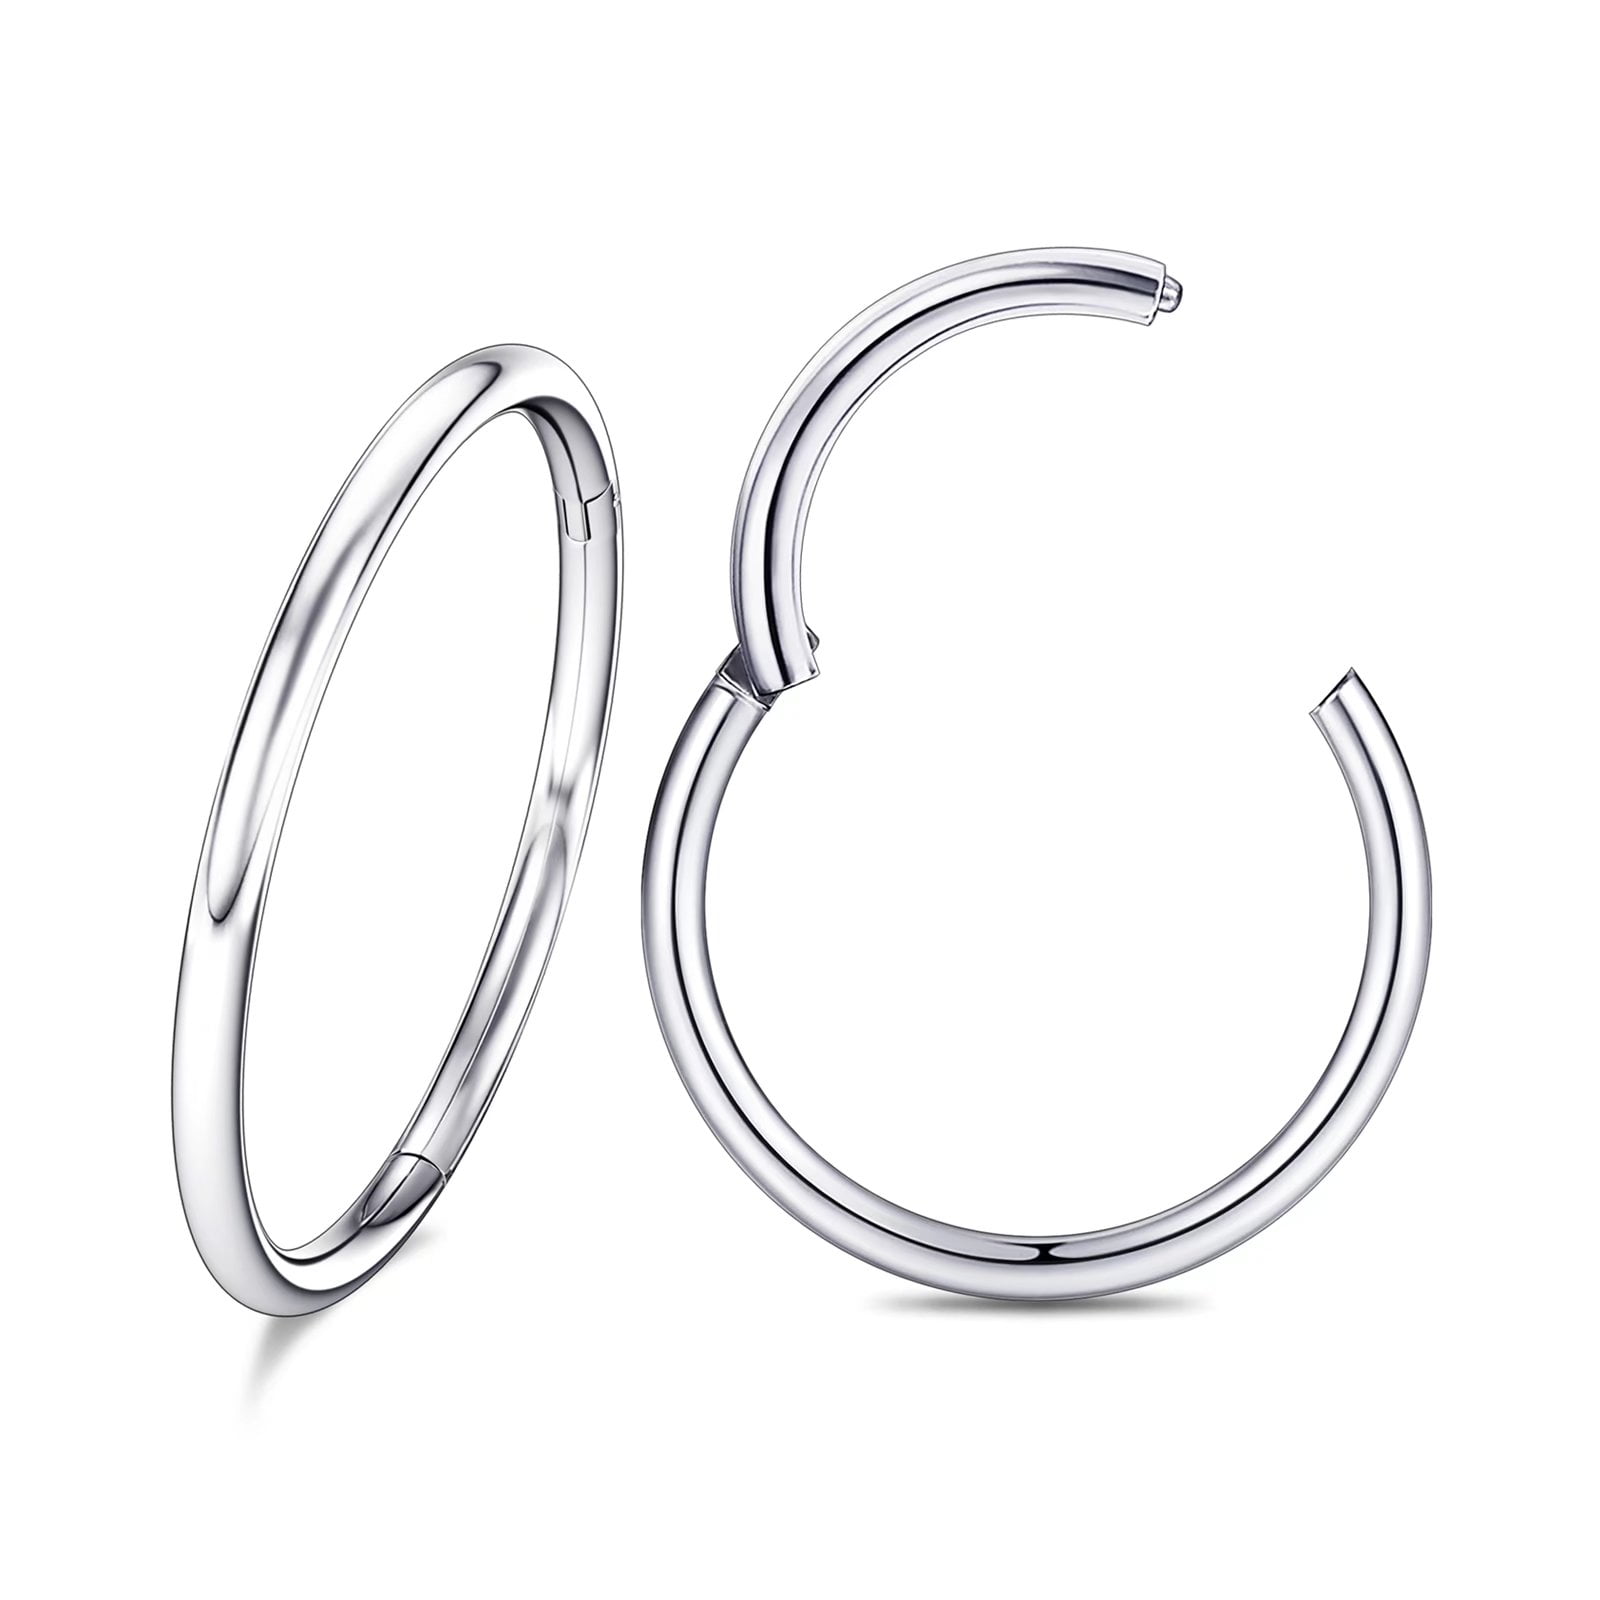 Clicker Titanium Hinged Nose Ring Septum Hoop Implant Grade Double Lined CZ  16g 8mm 10mm Daith Ear Tragus Cartilage Body Jewelry Piercing - Etsy